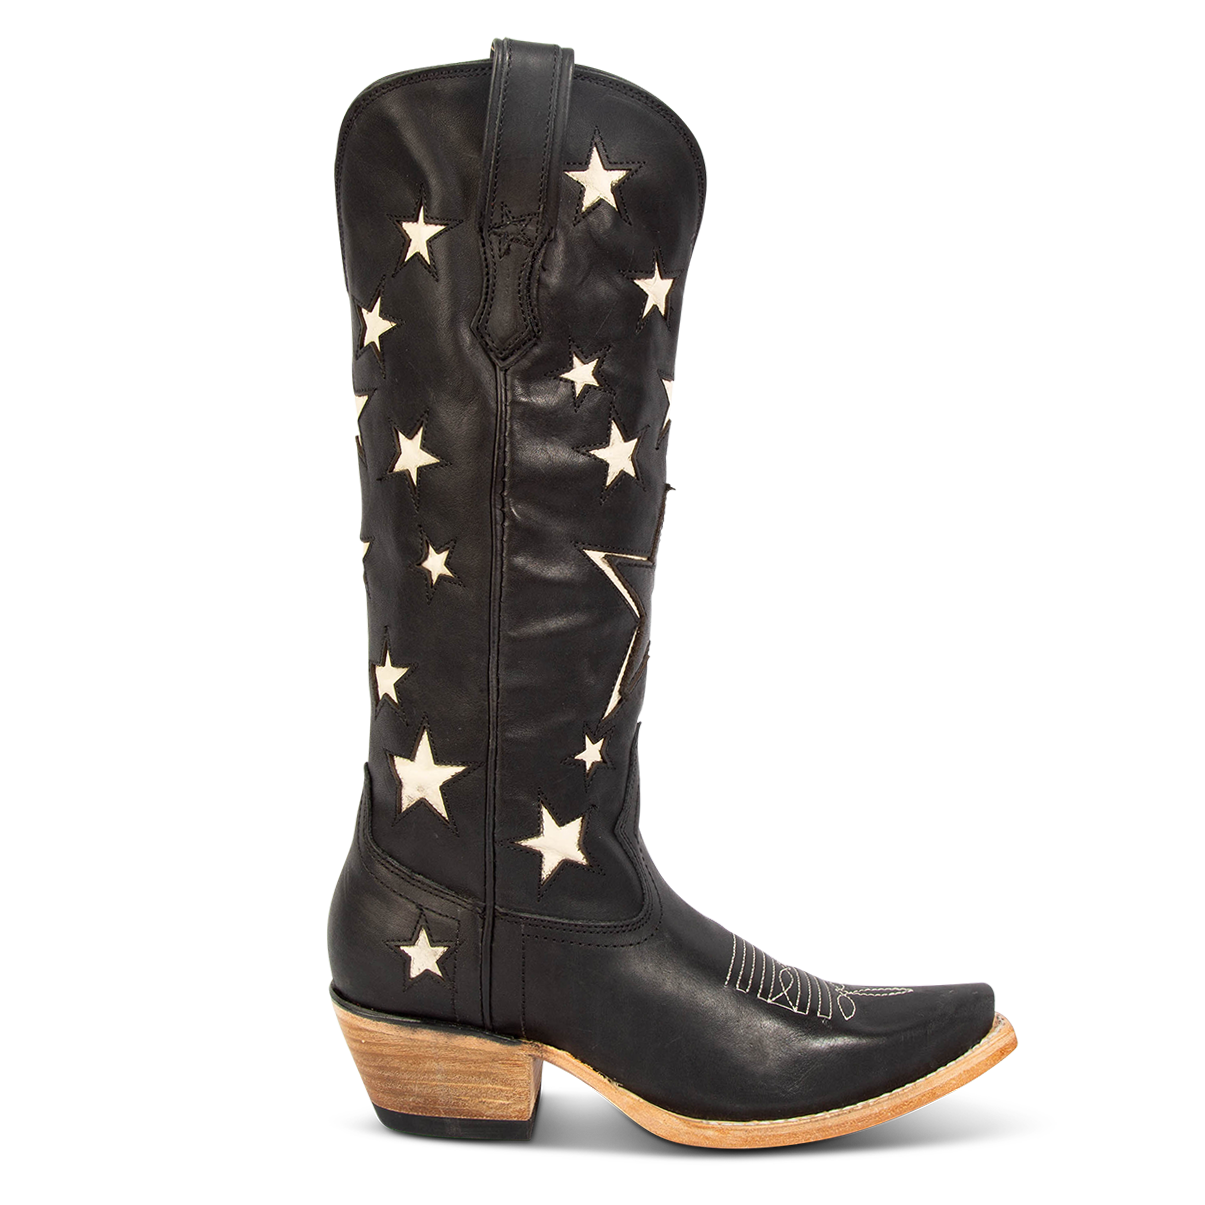 FREEBIRD women's Starzz black multi leather cowboy boot with two-toned leather star inlay detailing traditional stitching and snip toe construction